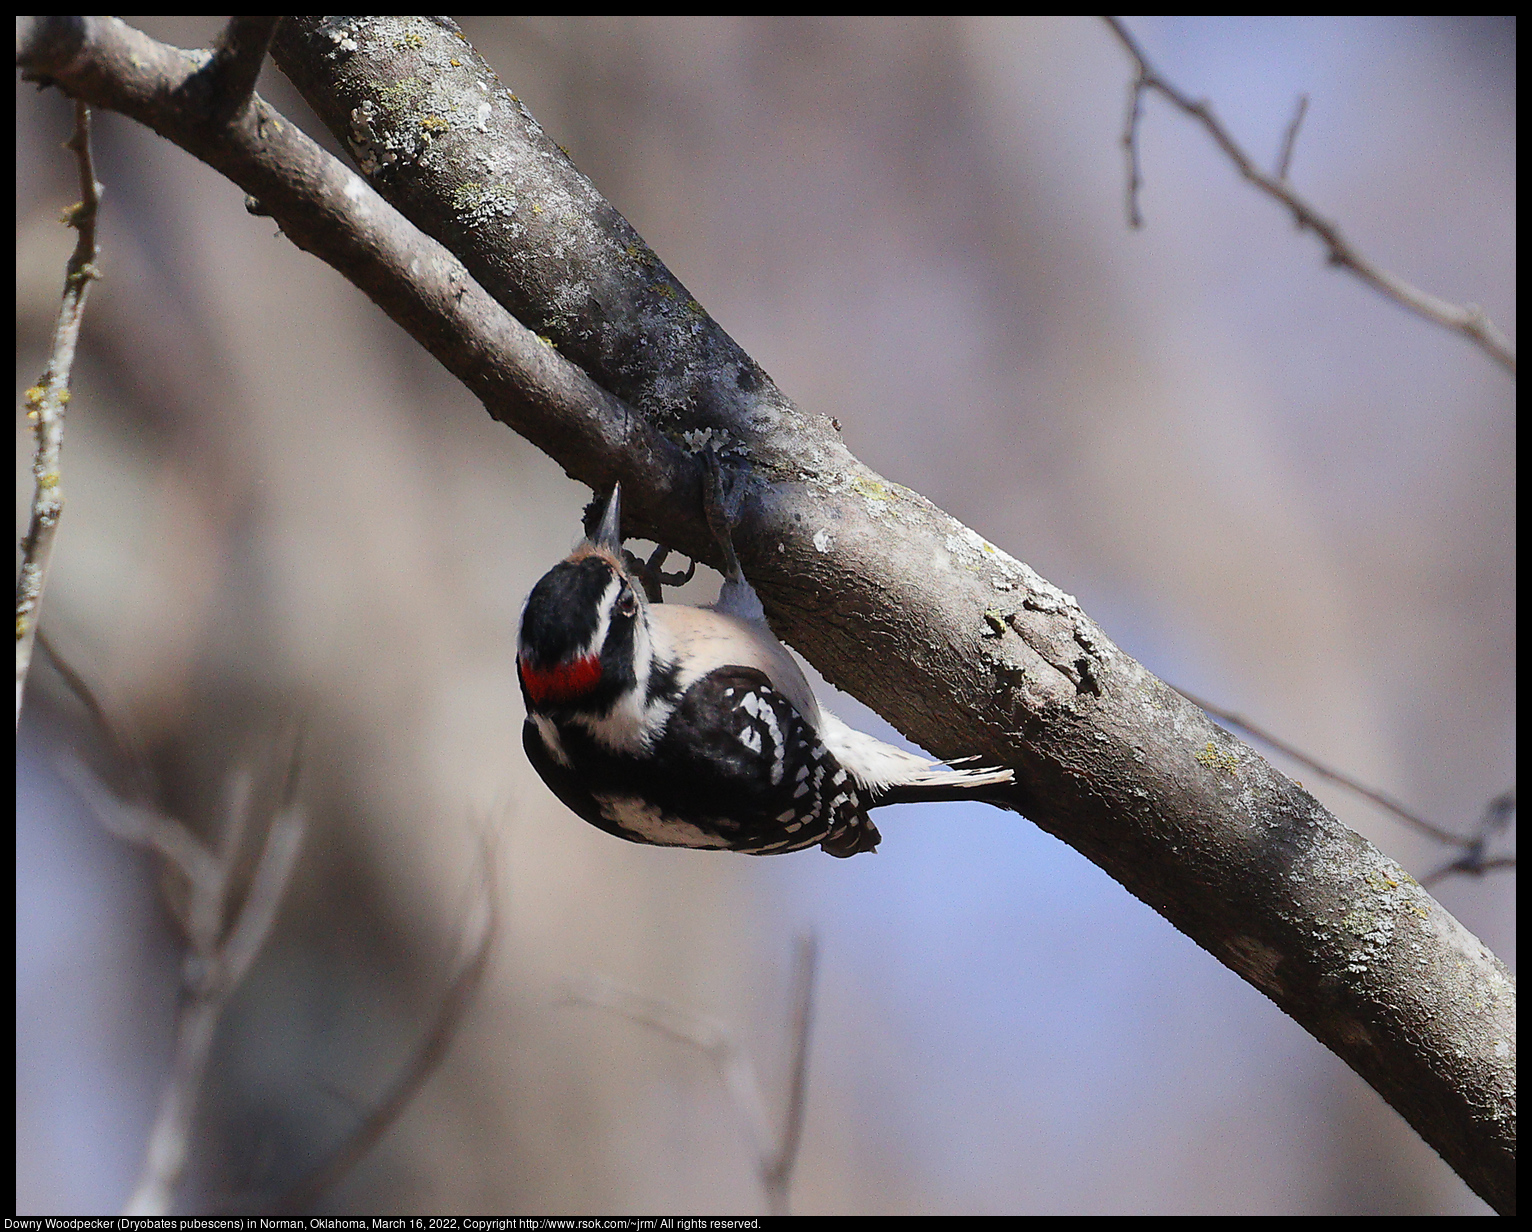 Downy Woodpecker (Dryobates pubescens) in Norman, Oklahoma, March 16, 2022